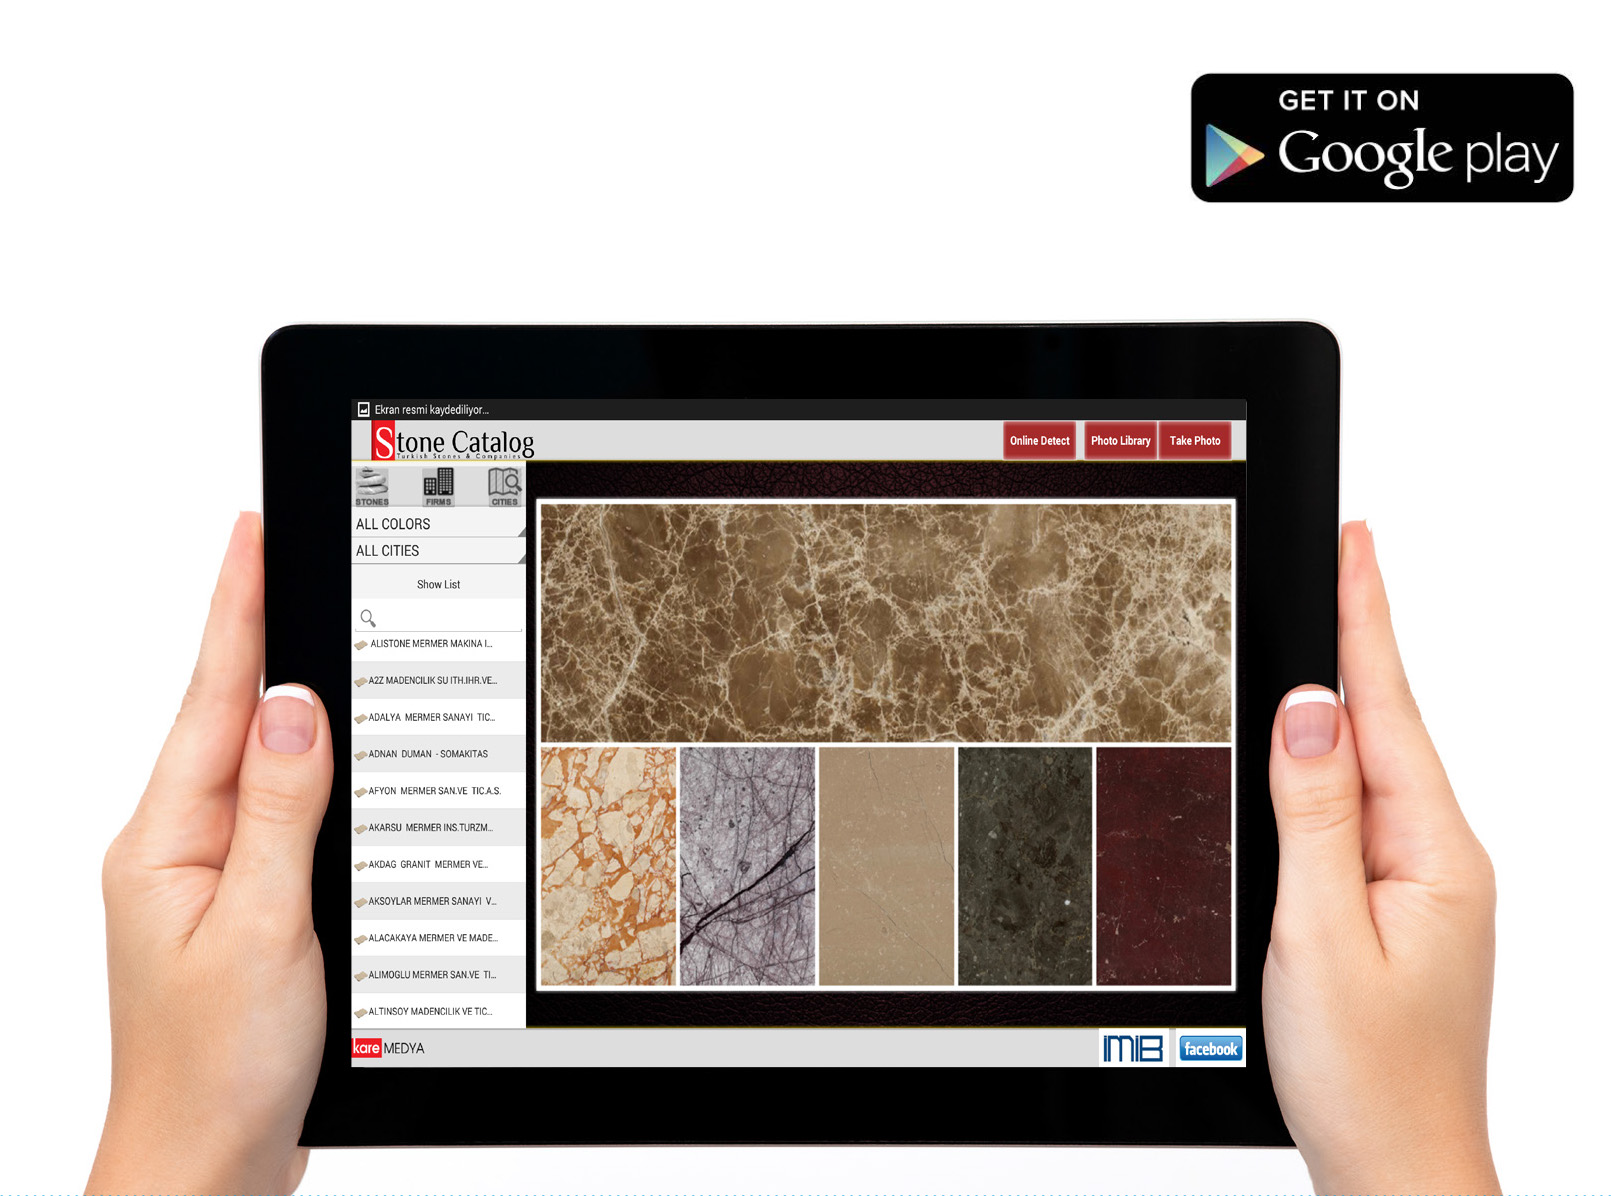 Turkish Natural Stone in “Turkish Stone Catalog” Now on Tablets